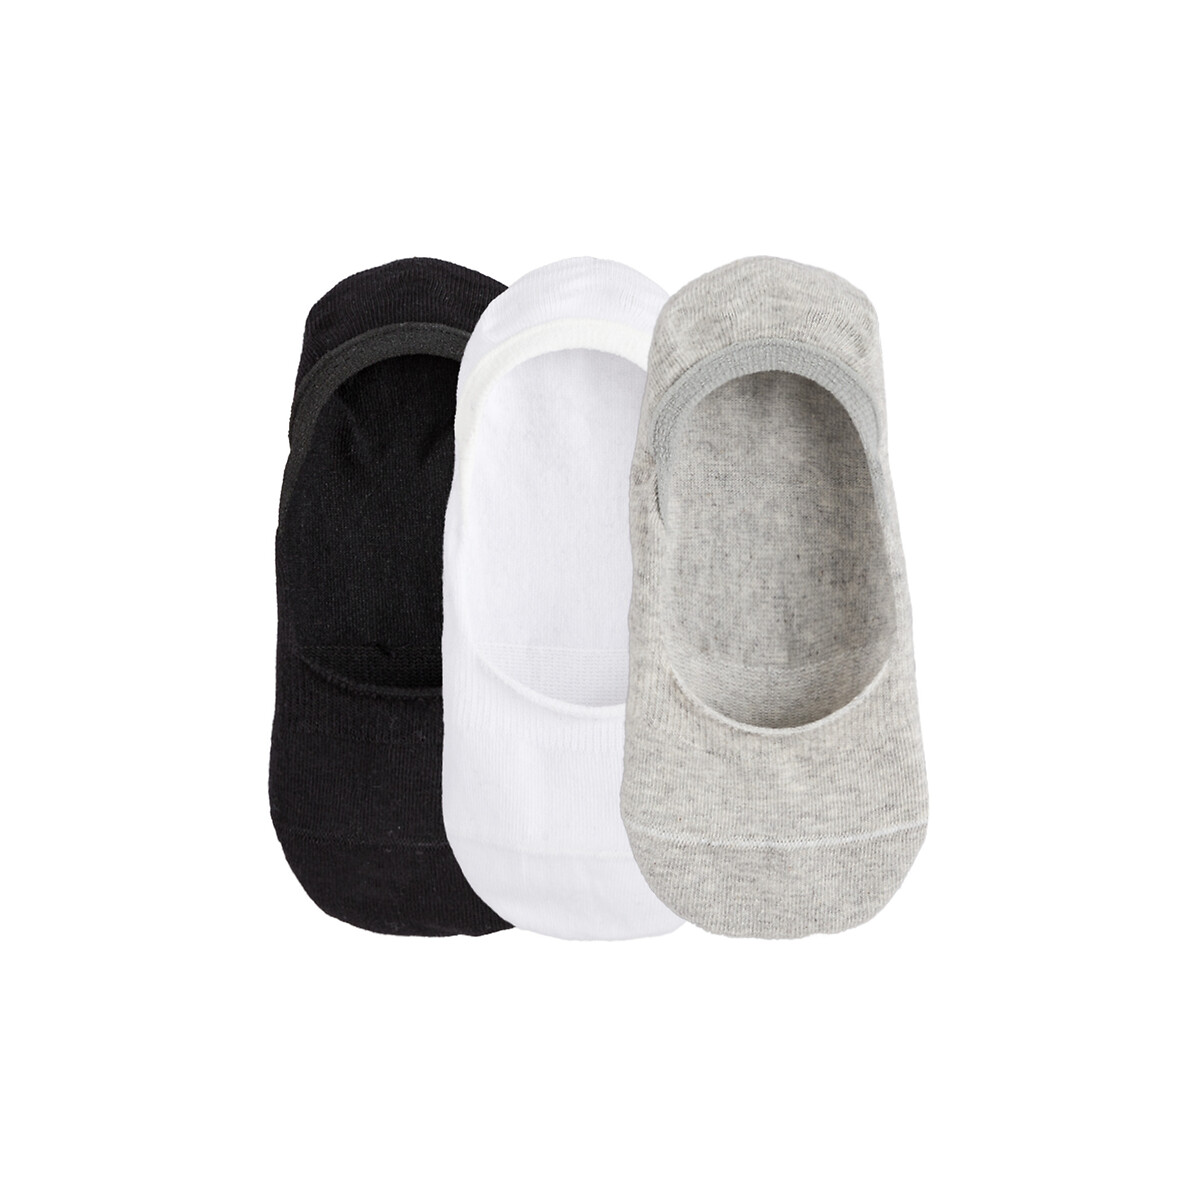 Pack of 3 Pairs of Footsies in Cotton Mix, Made in Europe